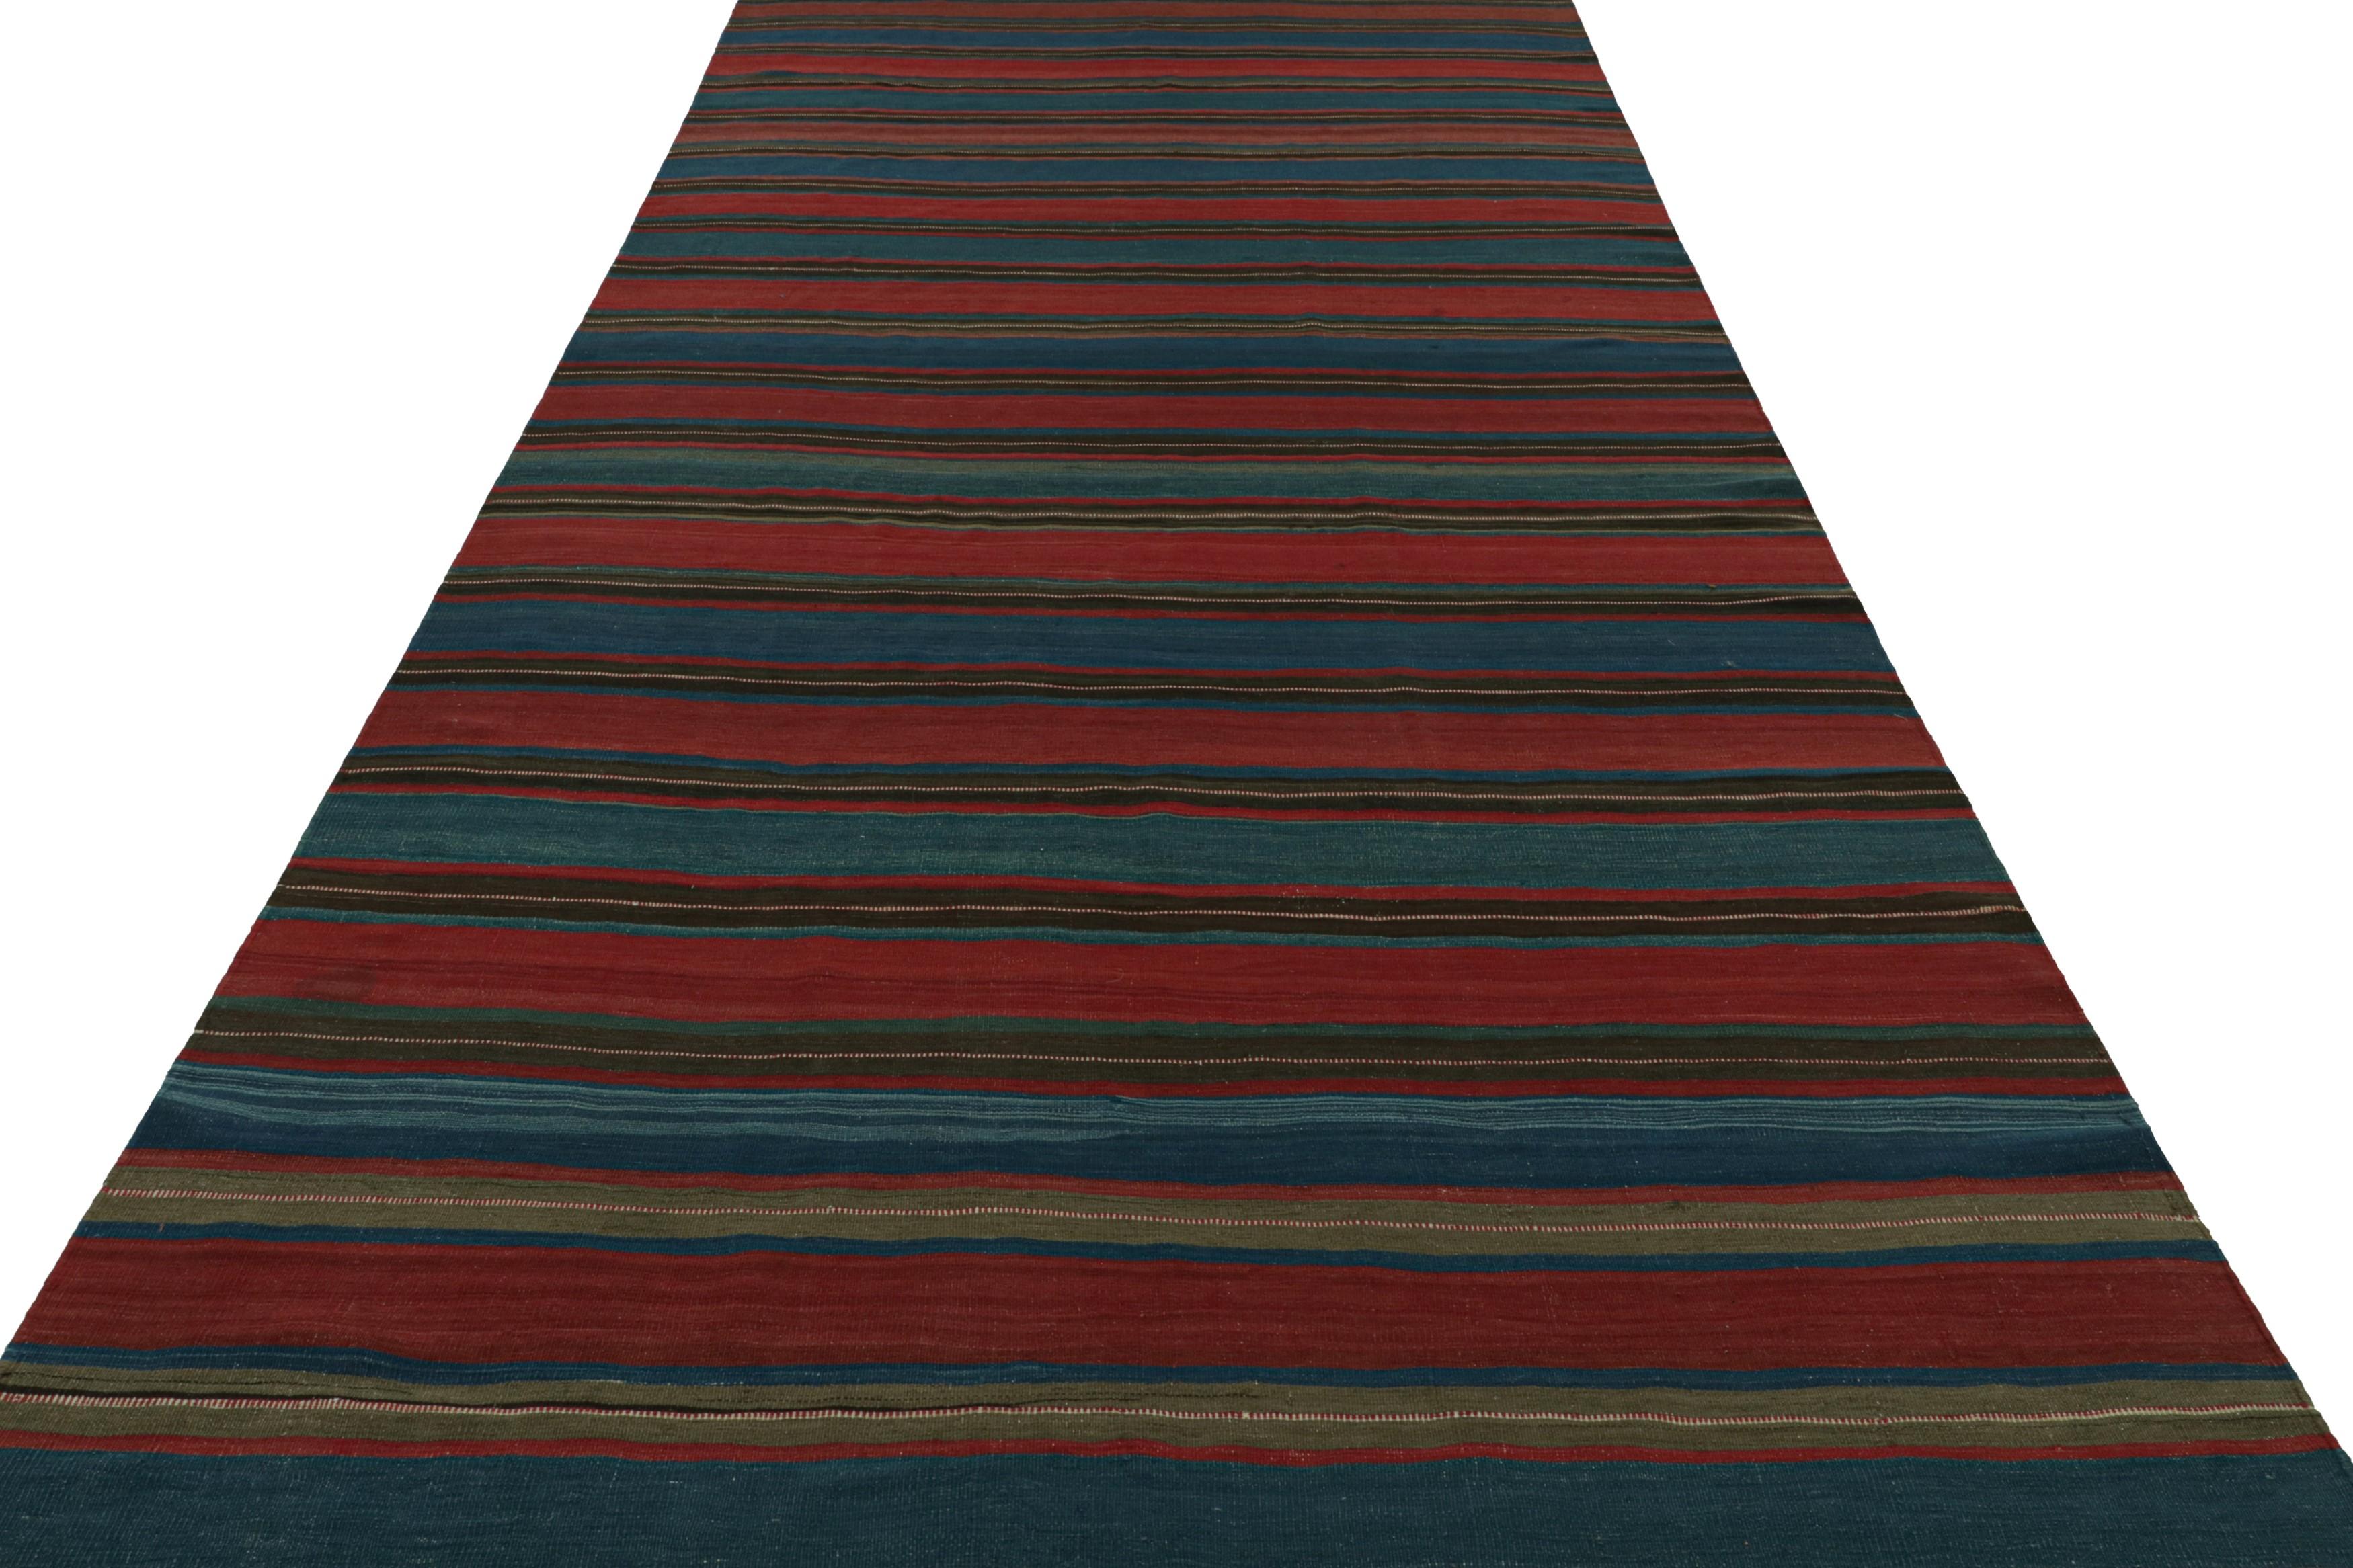 Hand-Woven Vintage Afghan Tribal Kilim Gallery Runner Rug, with Stripes, from Rug & Kilim   For Sale